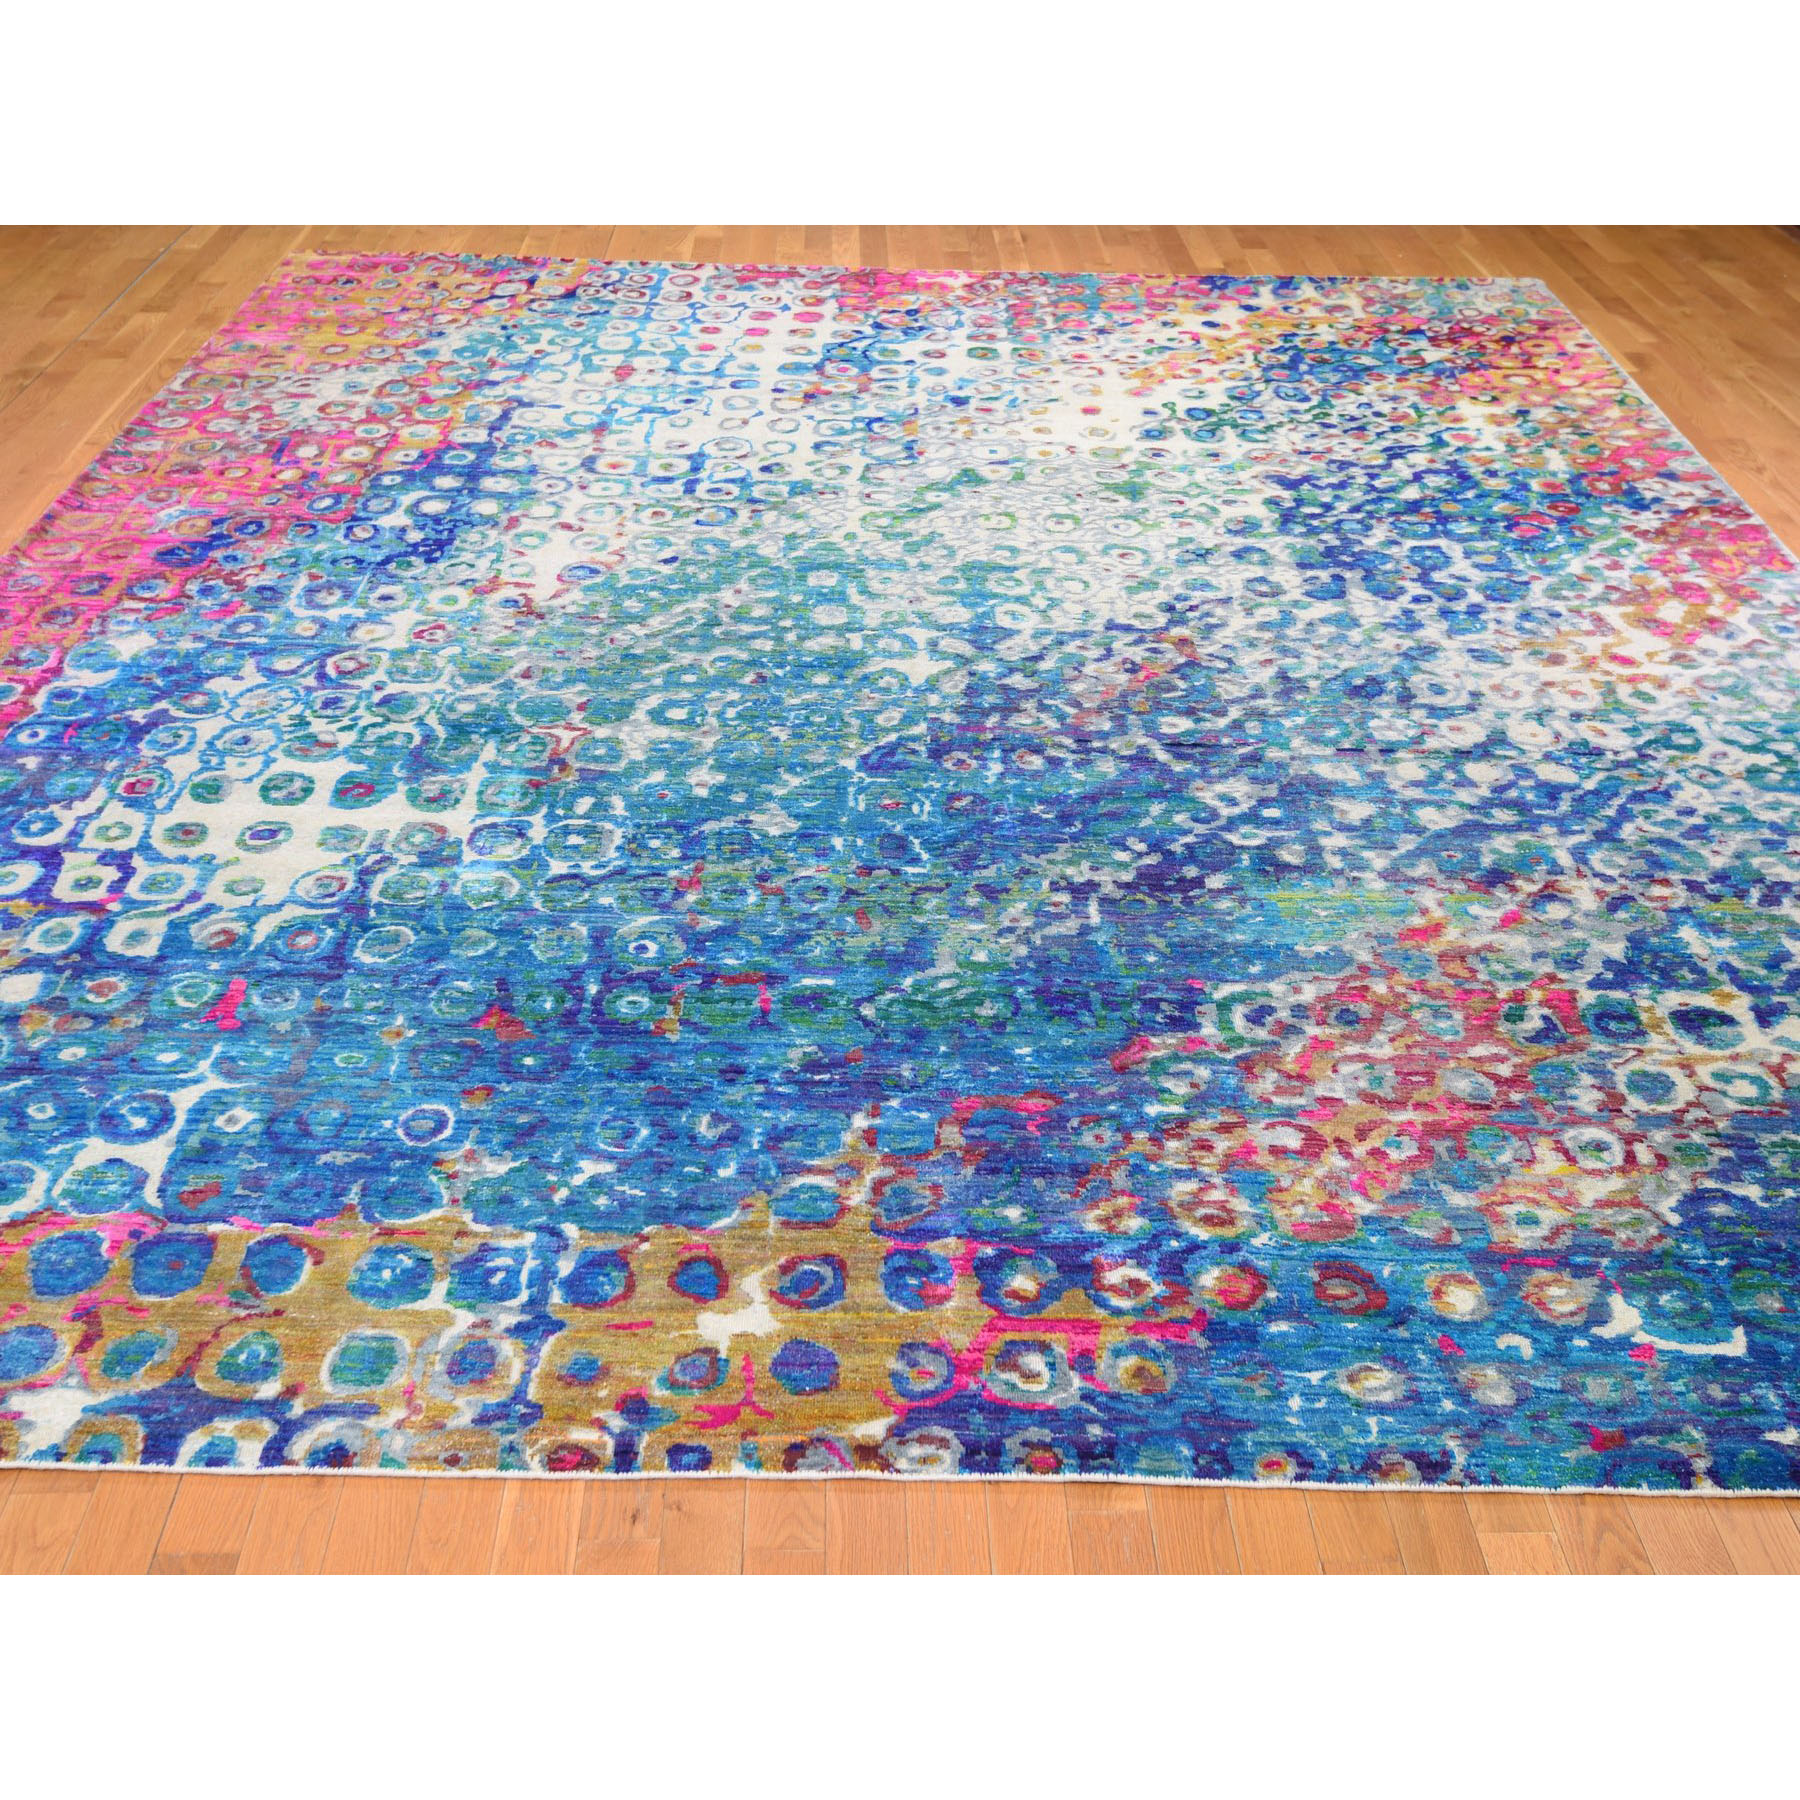 11-10 x15- THE PEACOCK, Oversized Sari Silk Colorful Hand Knotted Oriental Rug 